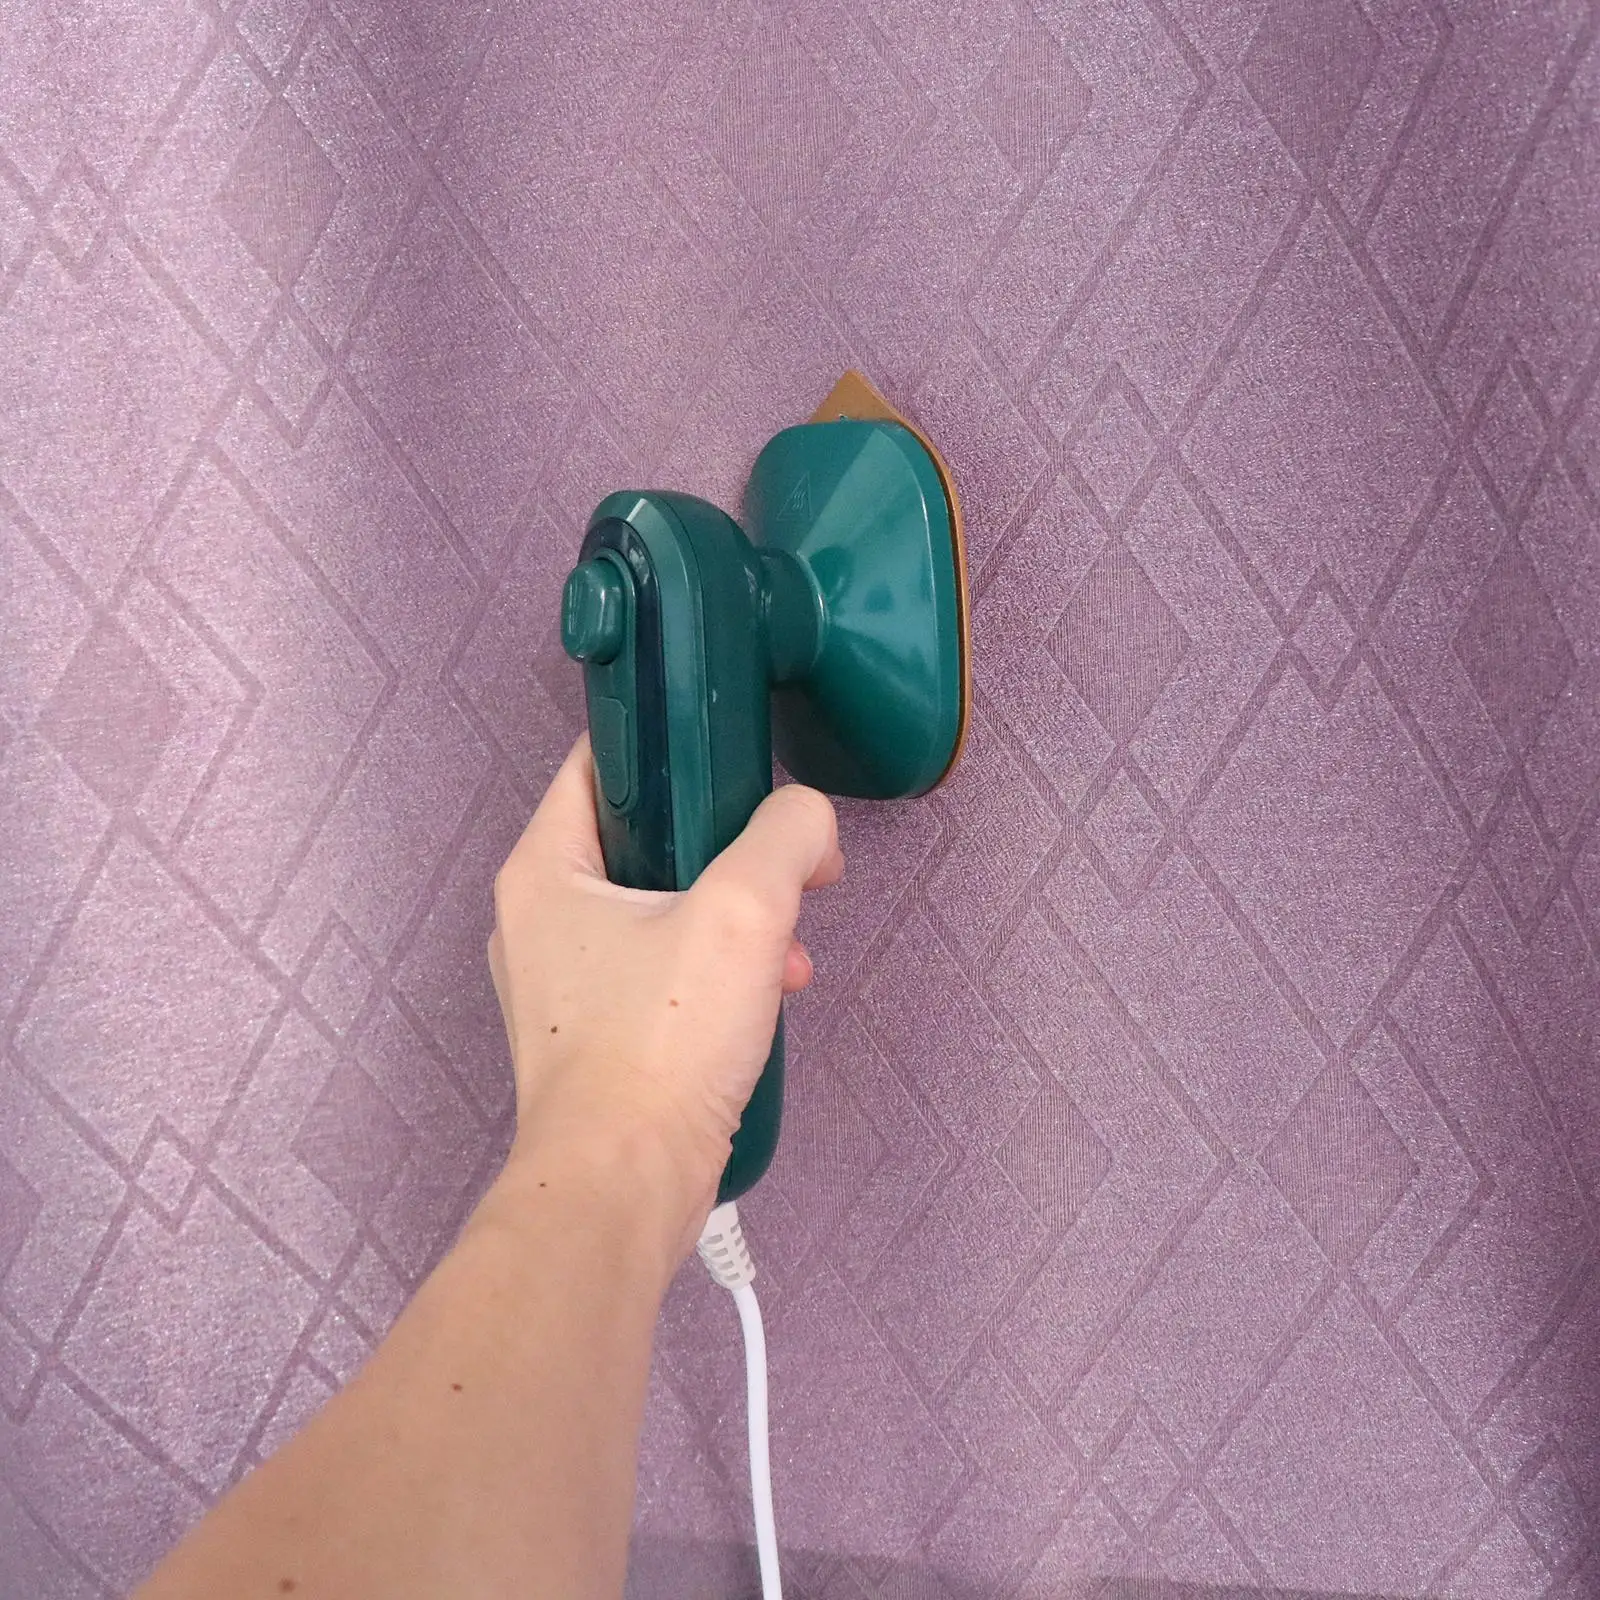 Professional Steam Iron Ironing Machine for Clothes T Shirts US Adapter